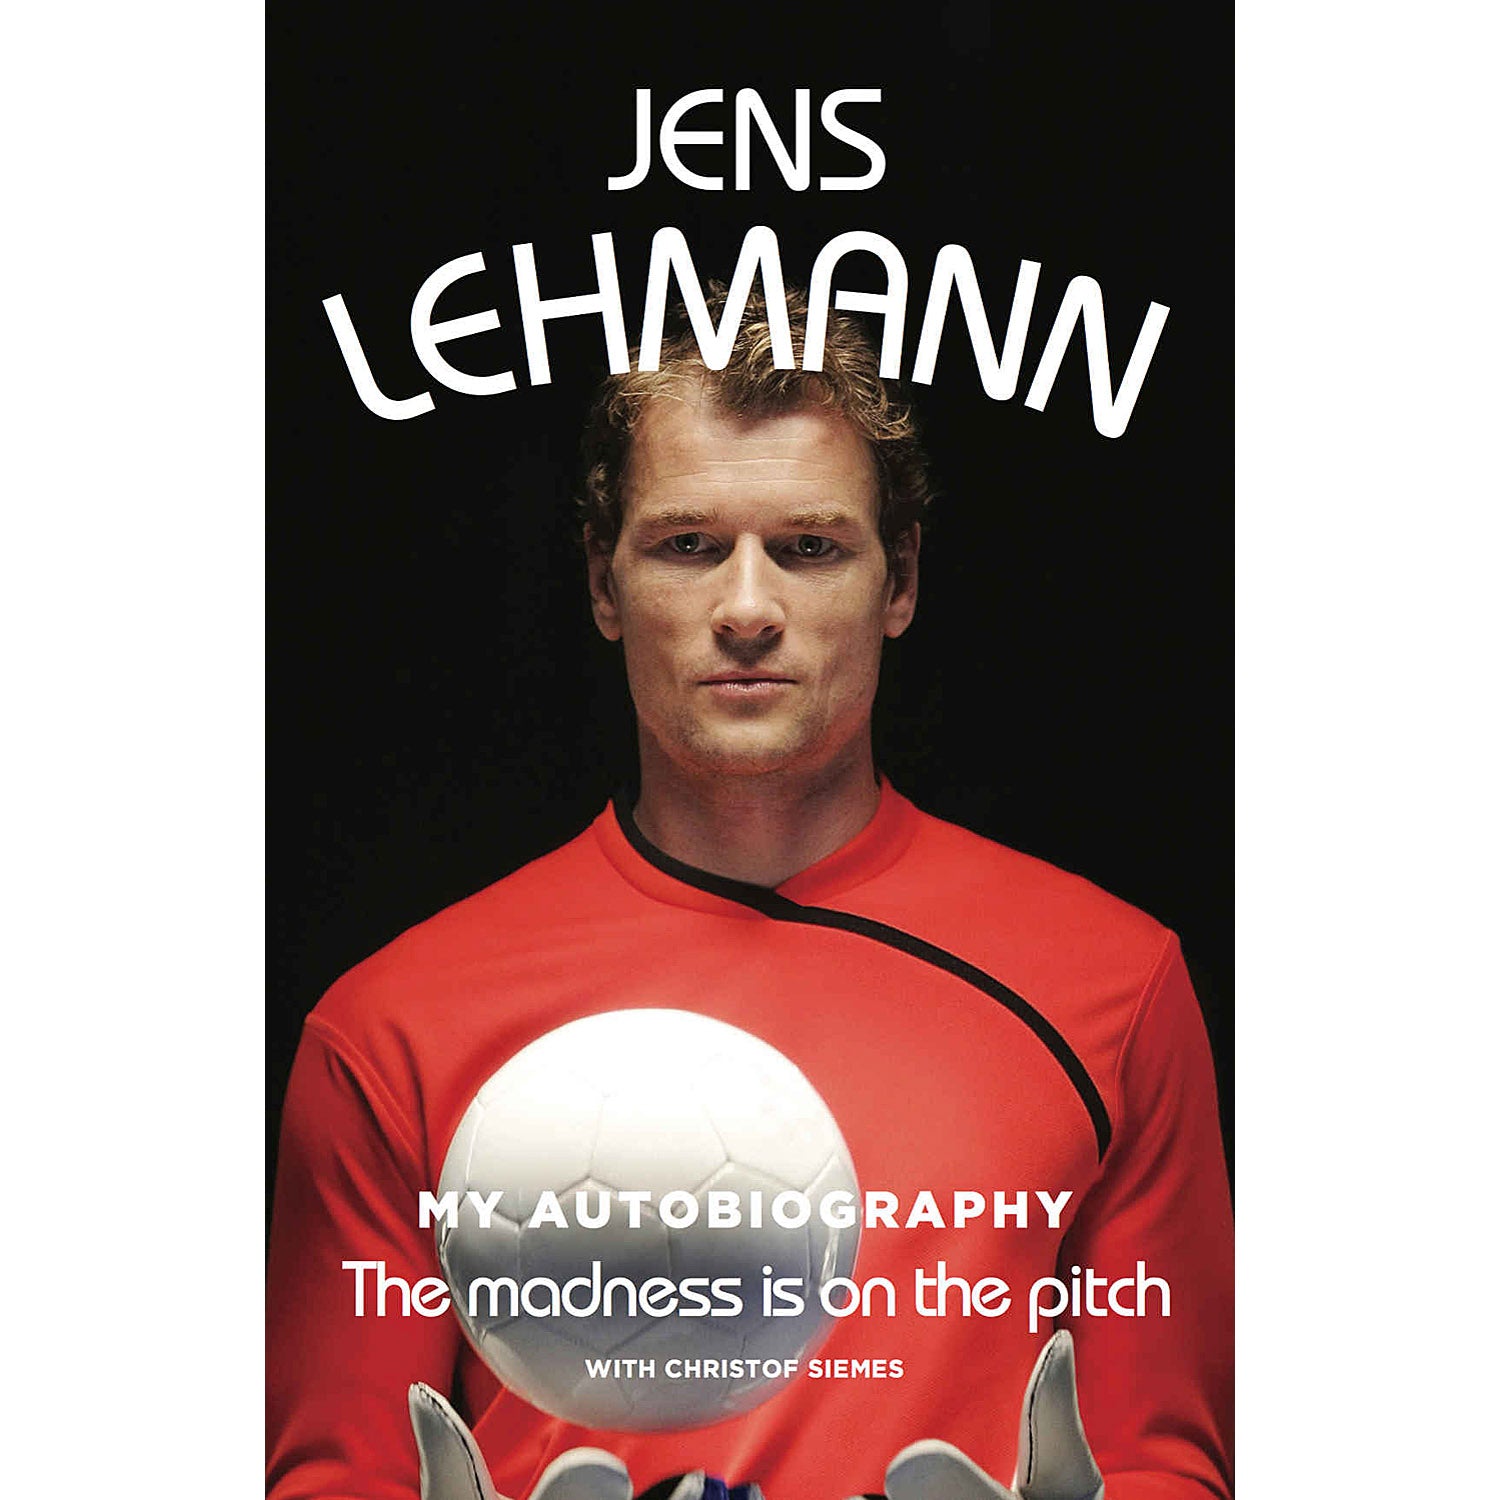 Jens Lehmann – My Autobiography – The madness is on the pitch